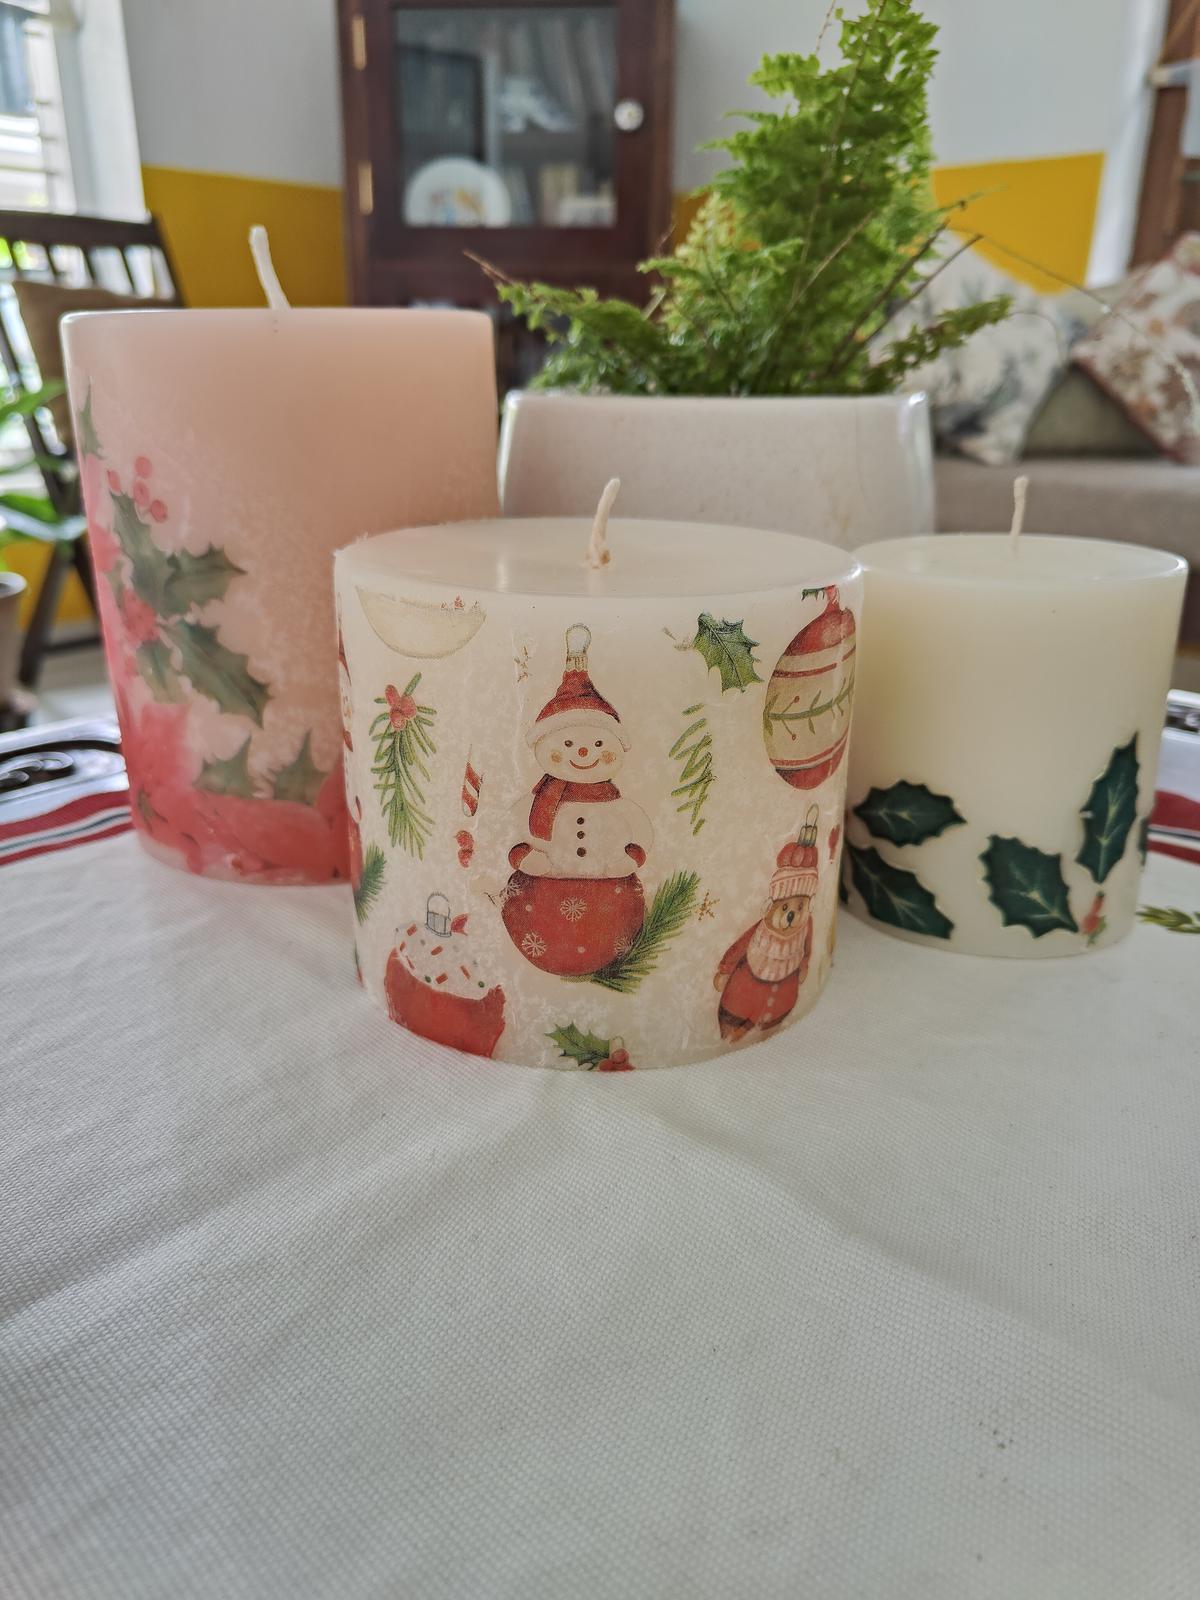 Scented, decorated candles made by Anna Thomas under her label Candle With Care. 